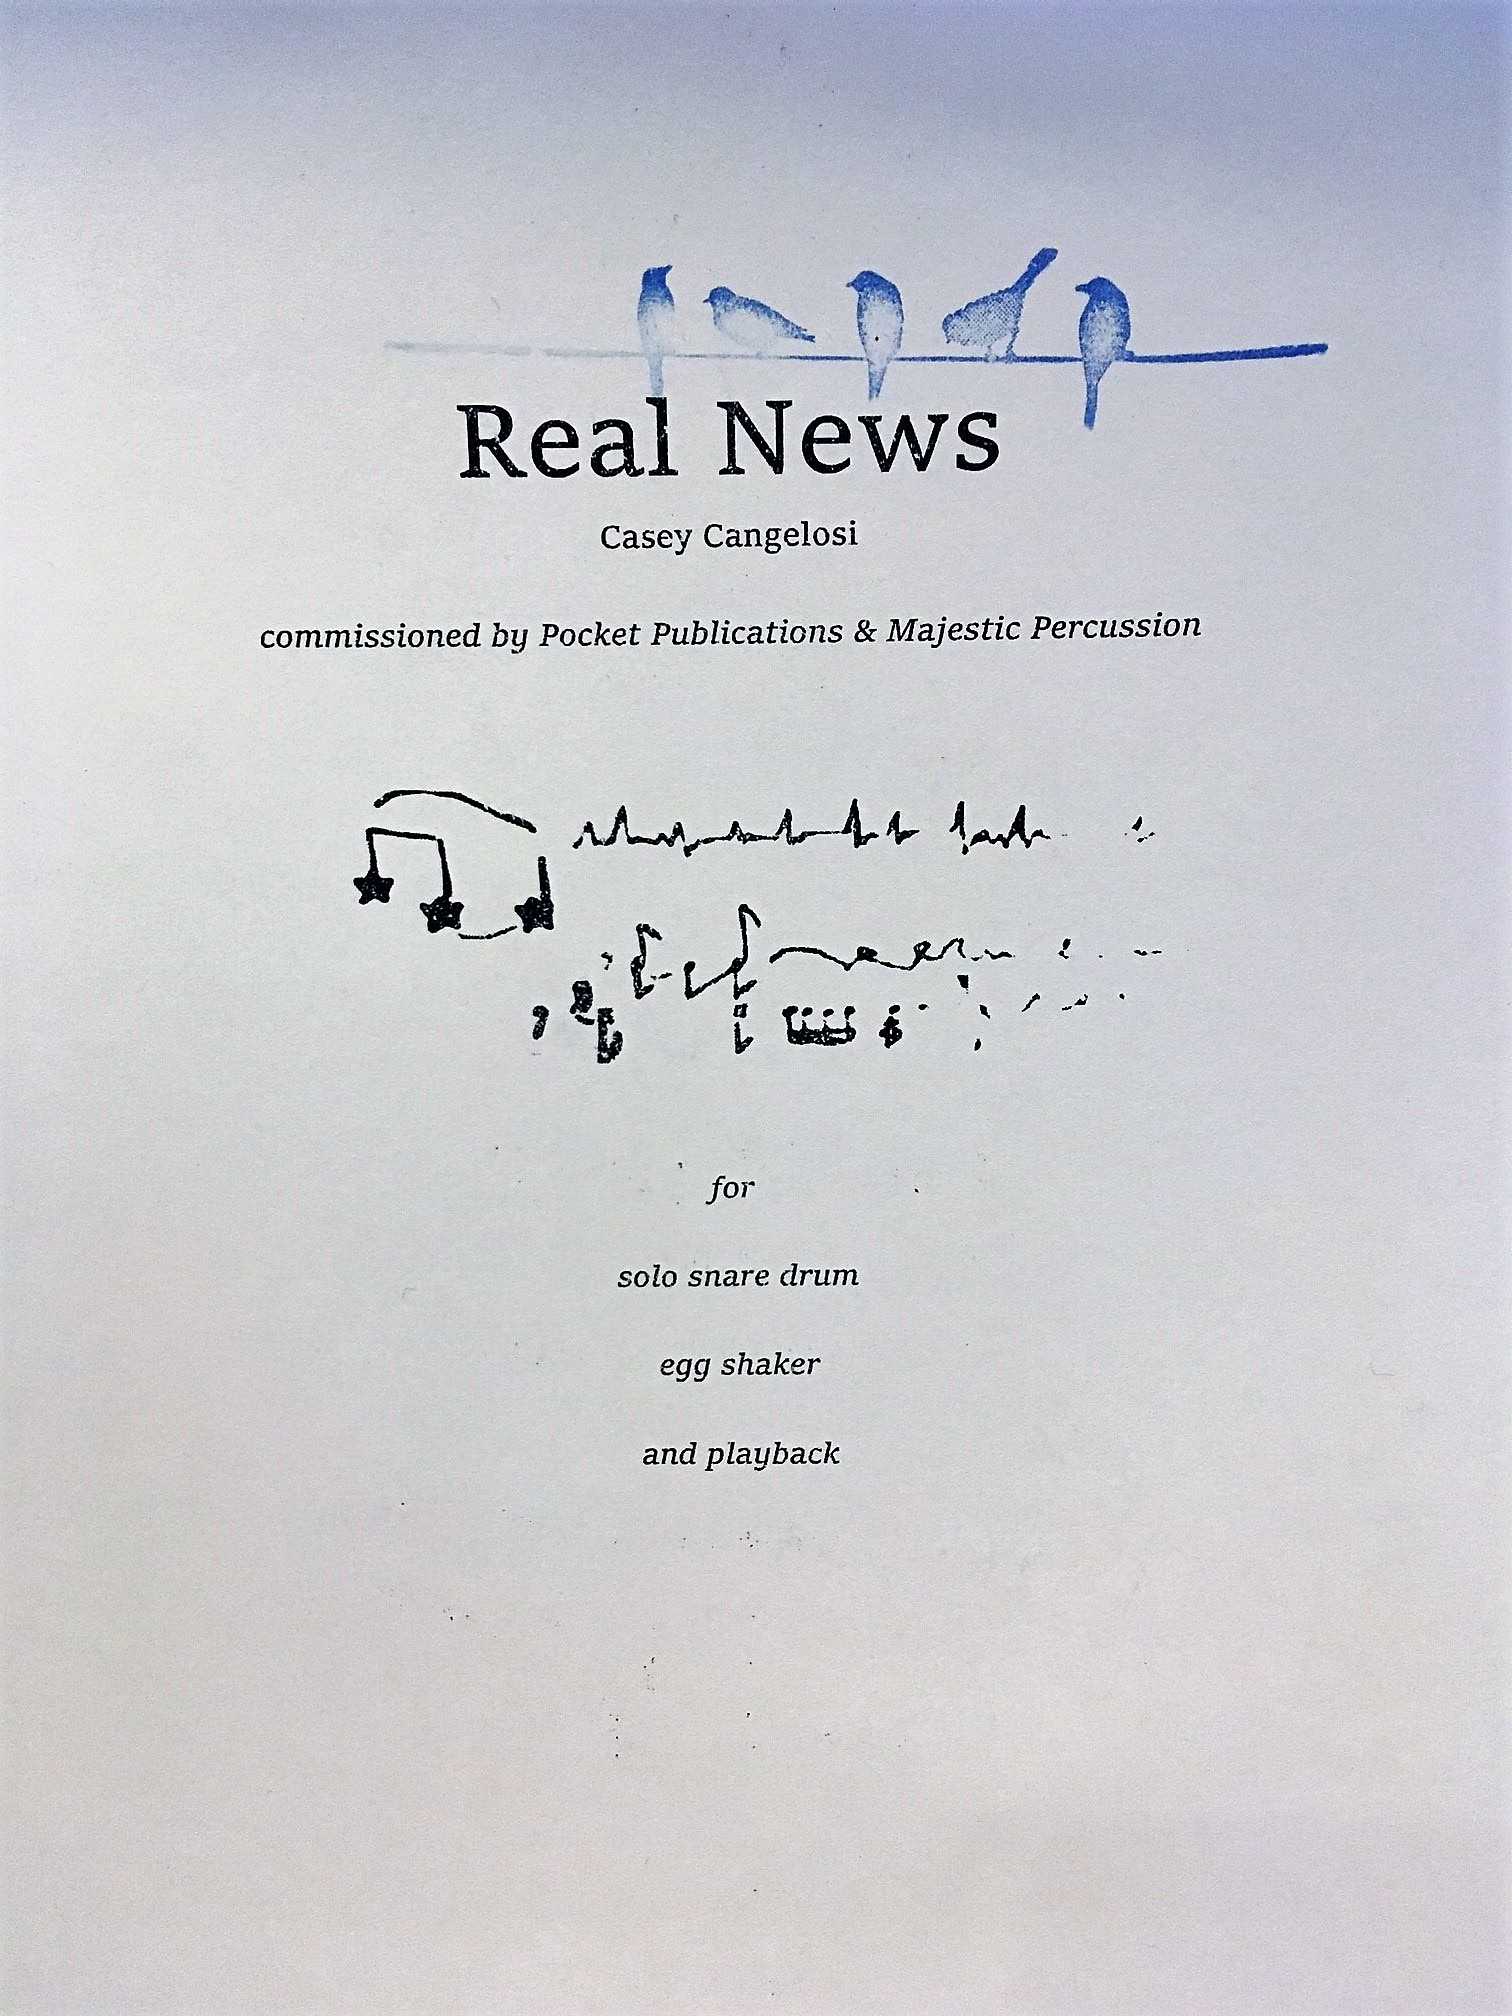 Real News by Casey Cangelosi